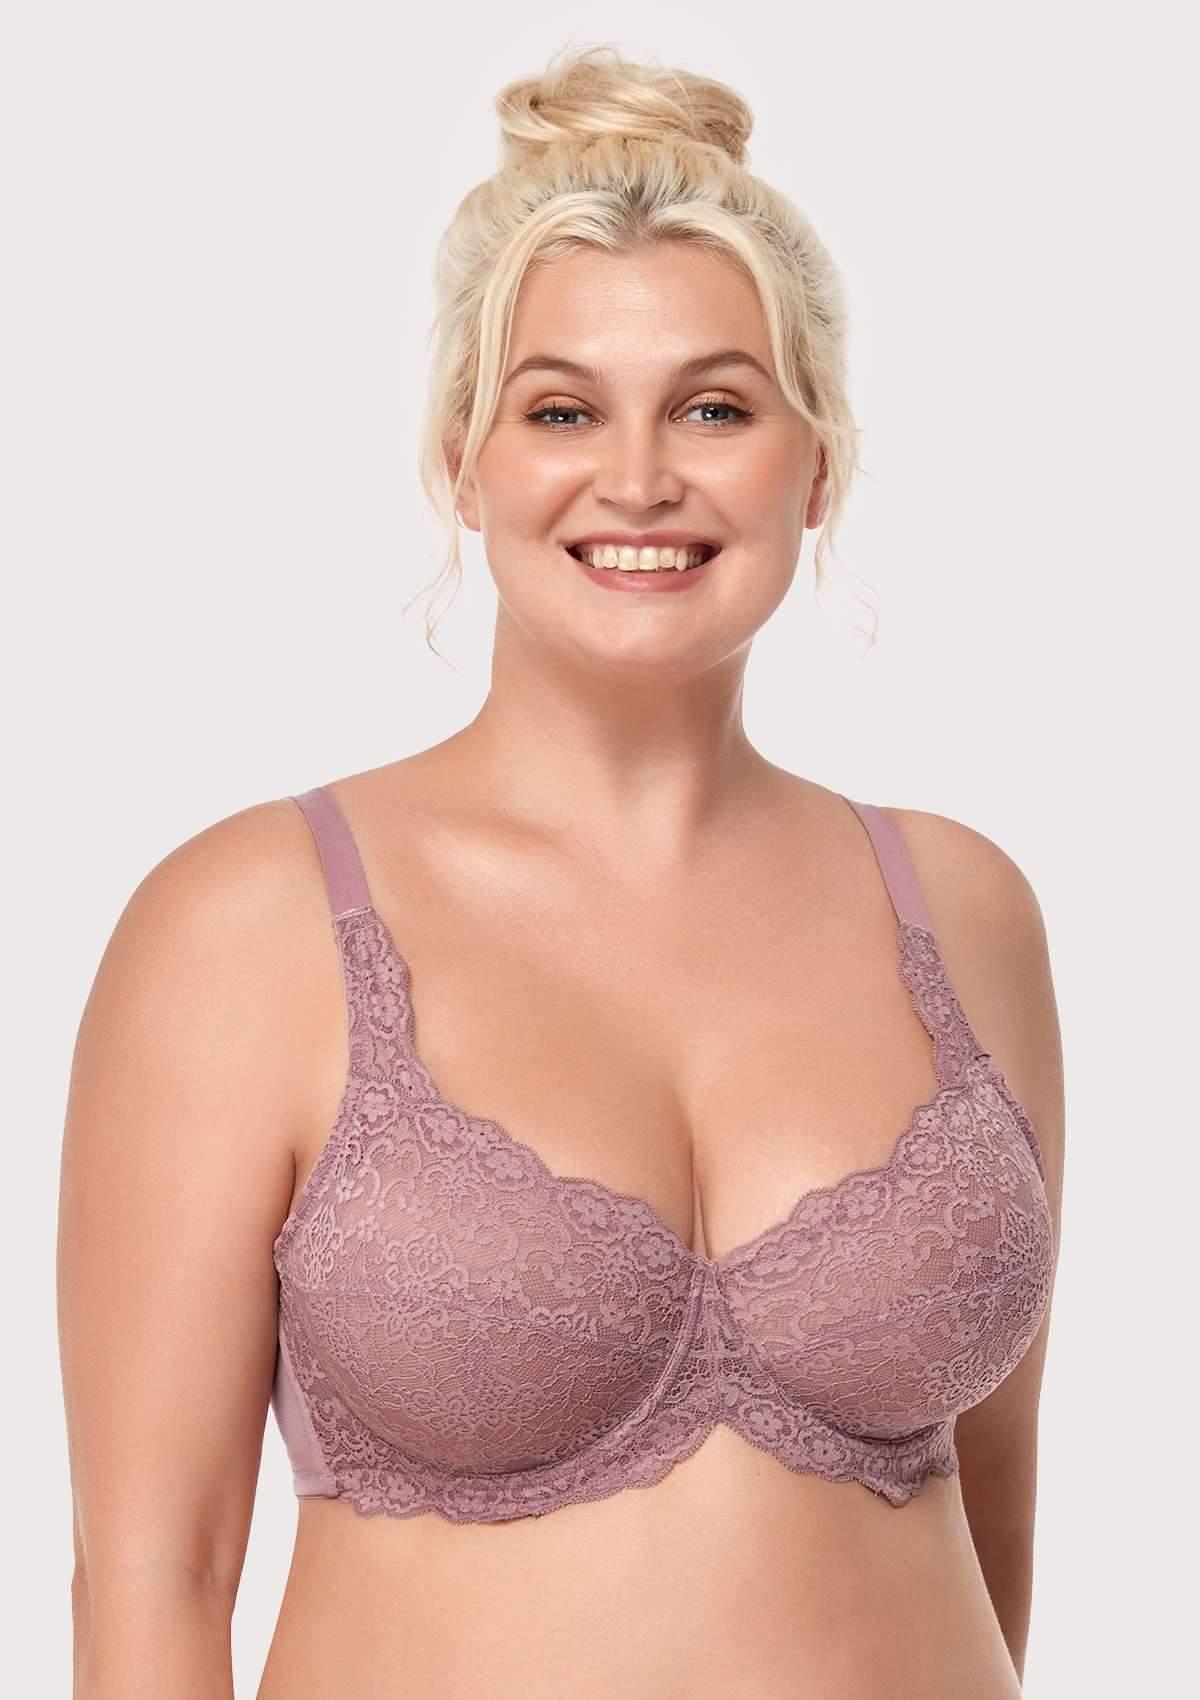 HSIA All-Over Floral Lace Unlined Bra: Minimizer Bra For Heavy Breasts - Purple / 44 / C